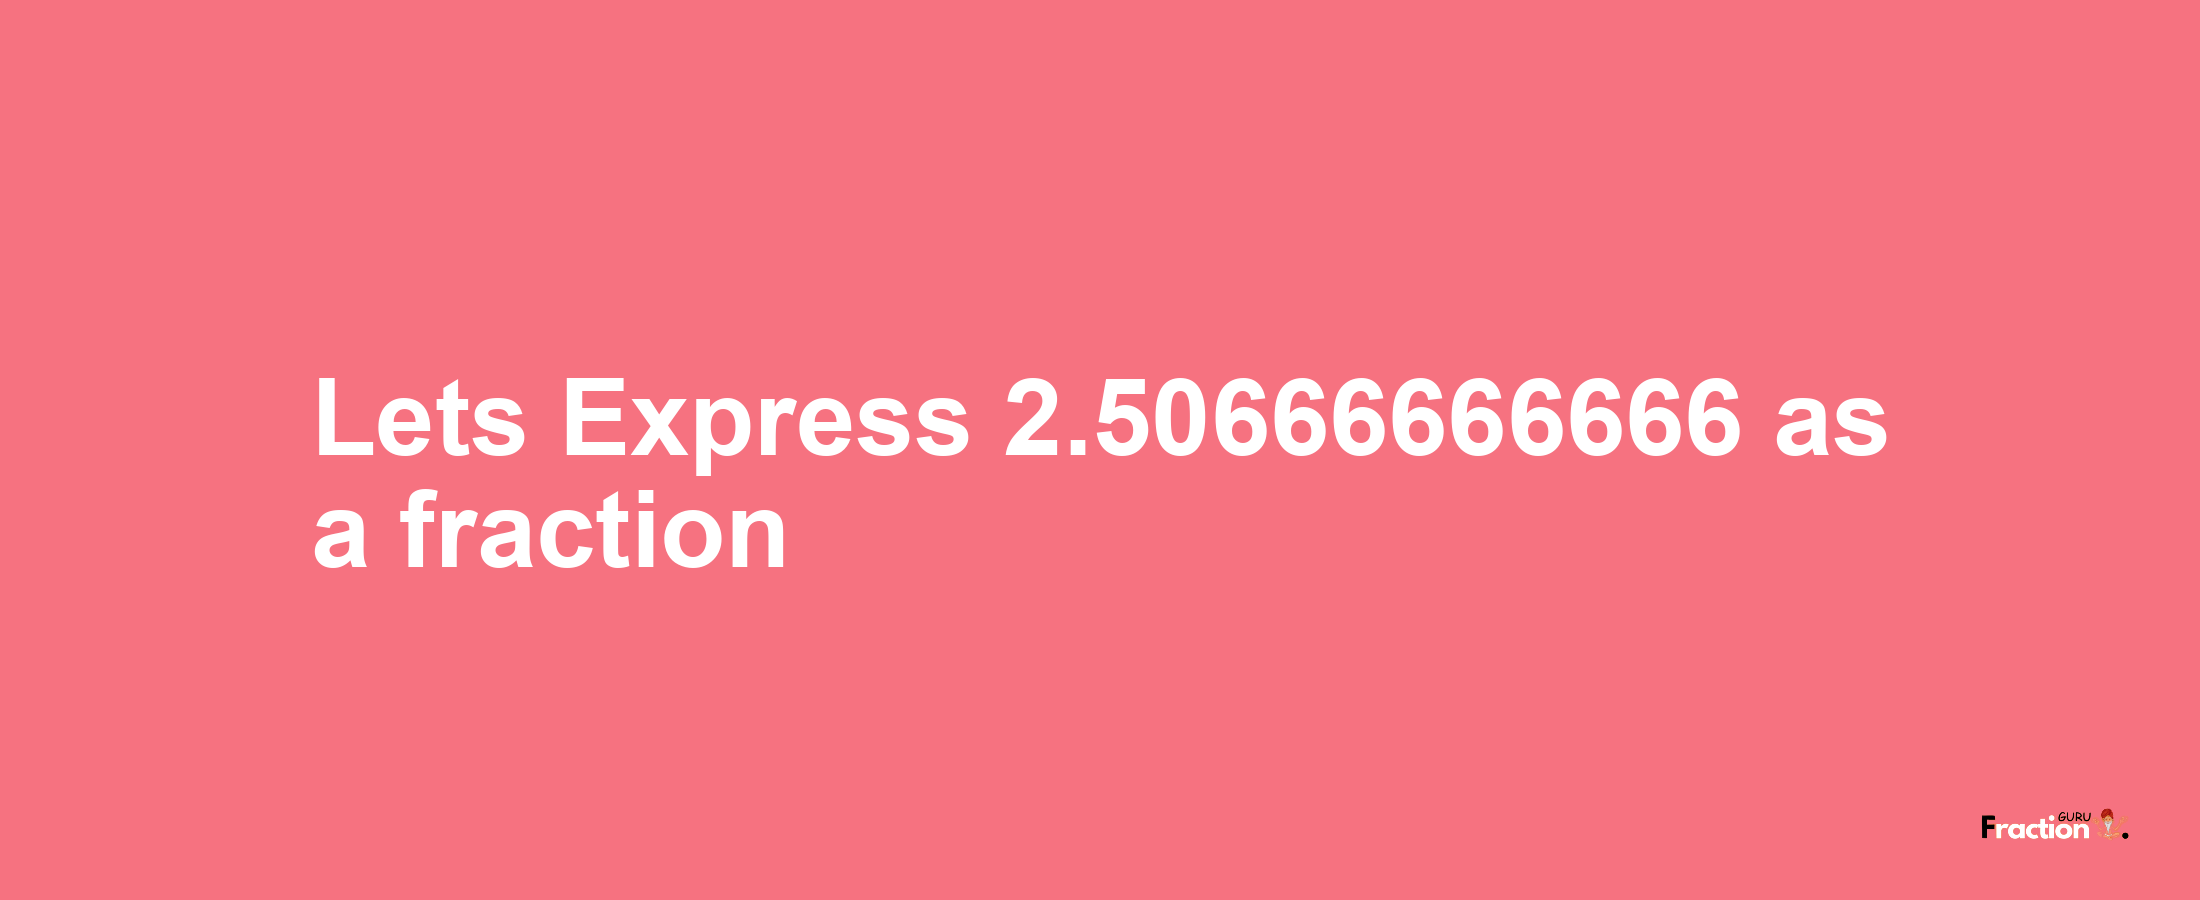 Lets Express 2.50666666666 as afraction